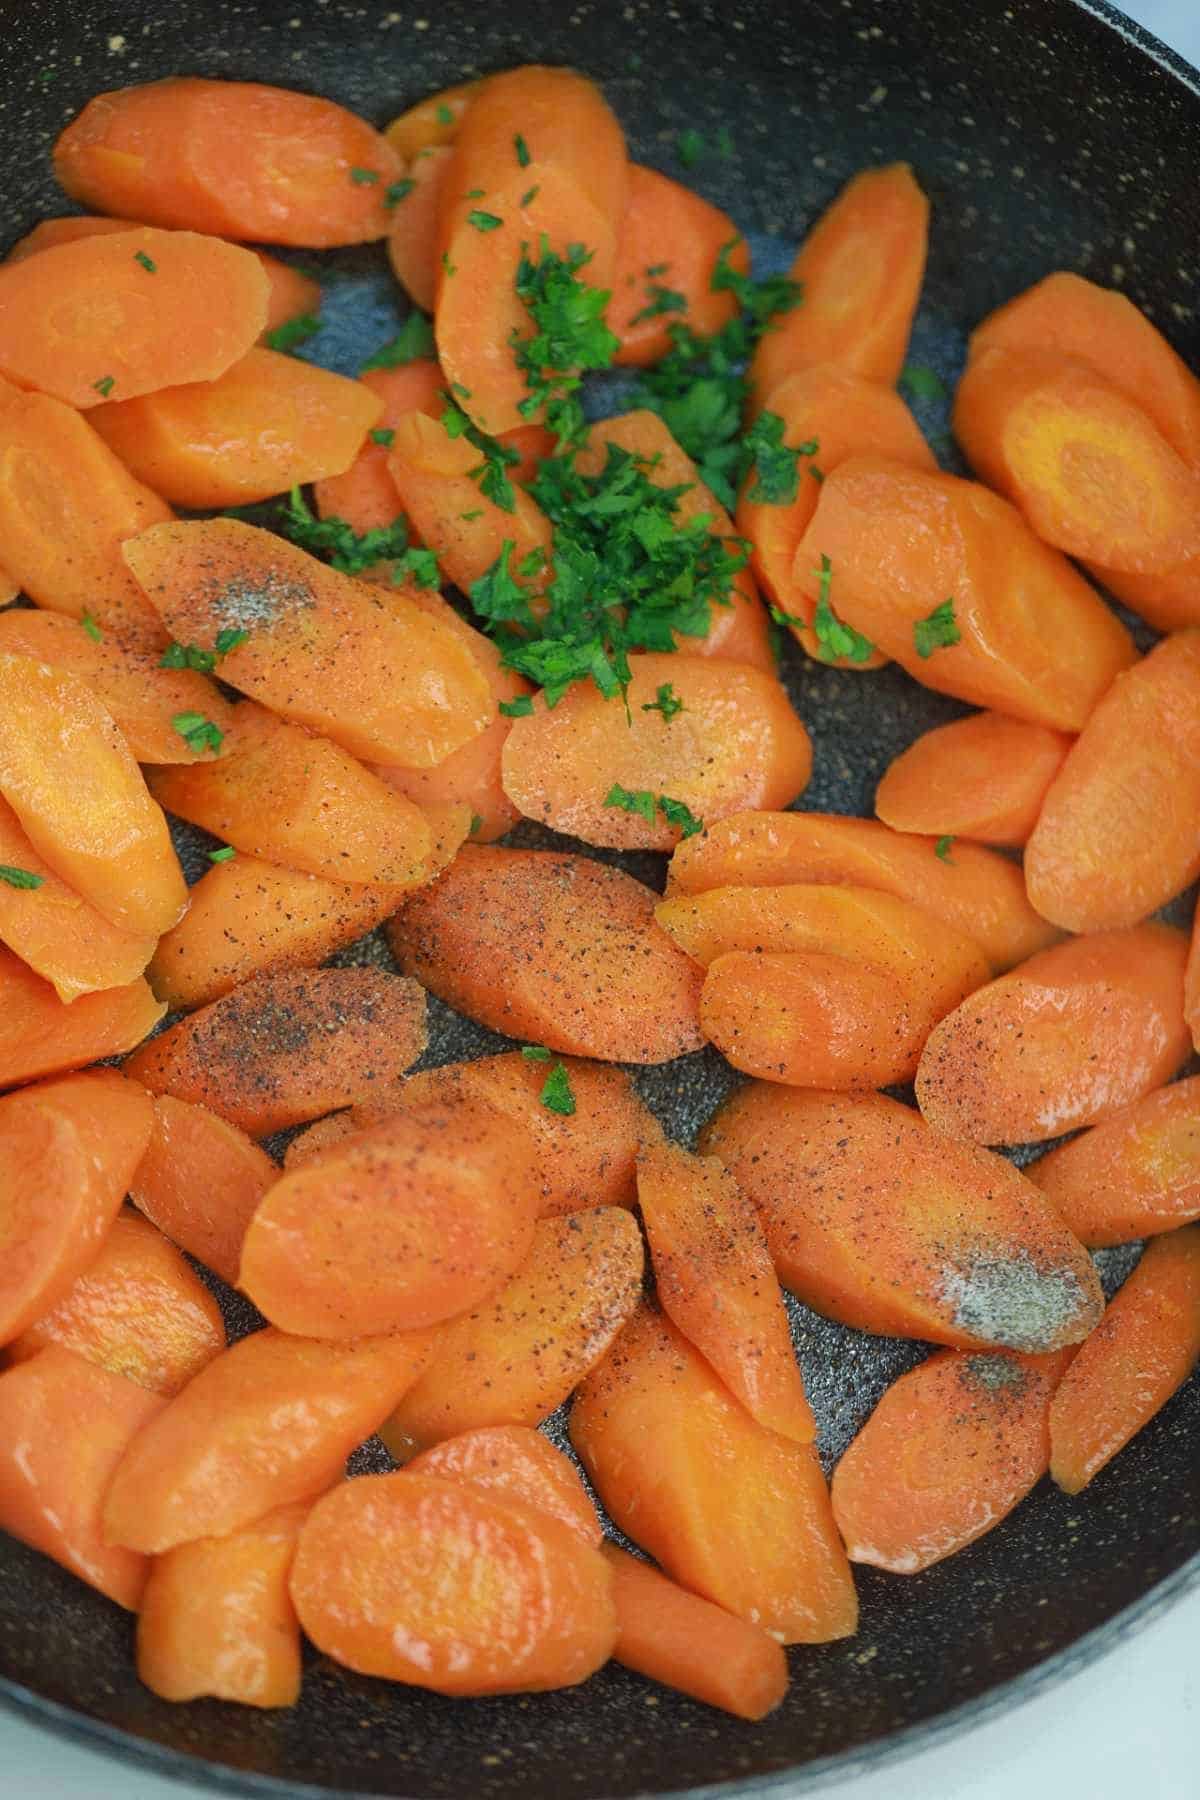 parsley and pepper added to carrots.